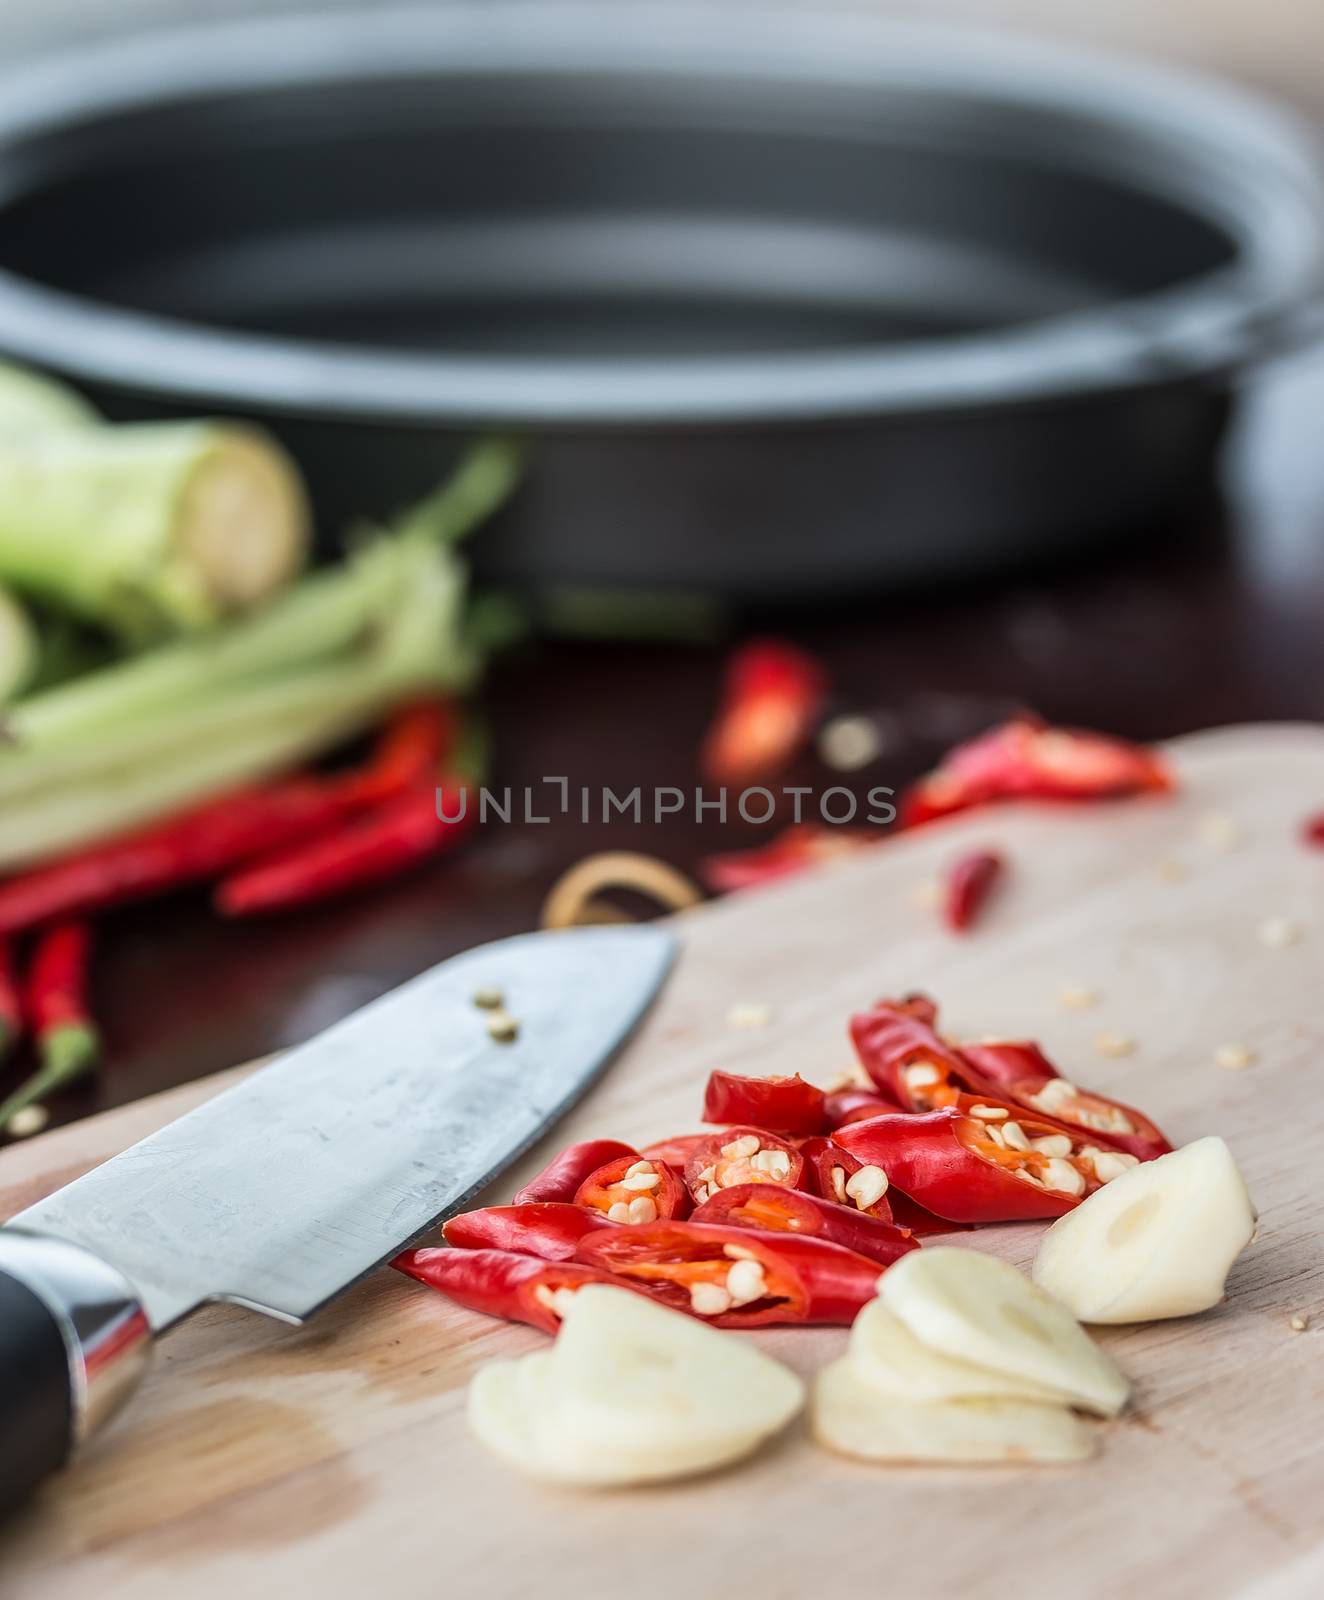 Cooking Spicy Food Means Red Chilli And Chile by stuartmiles